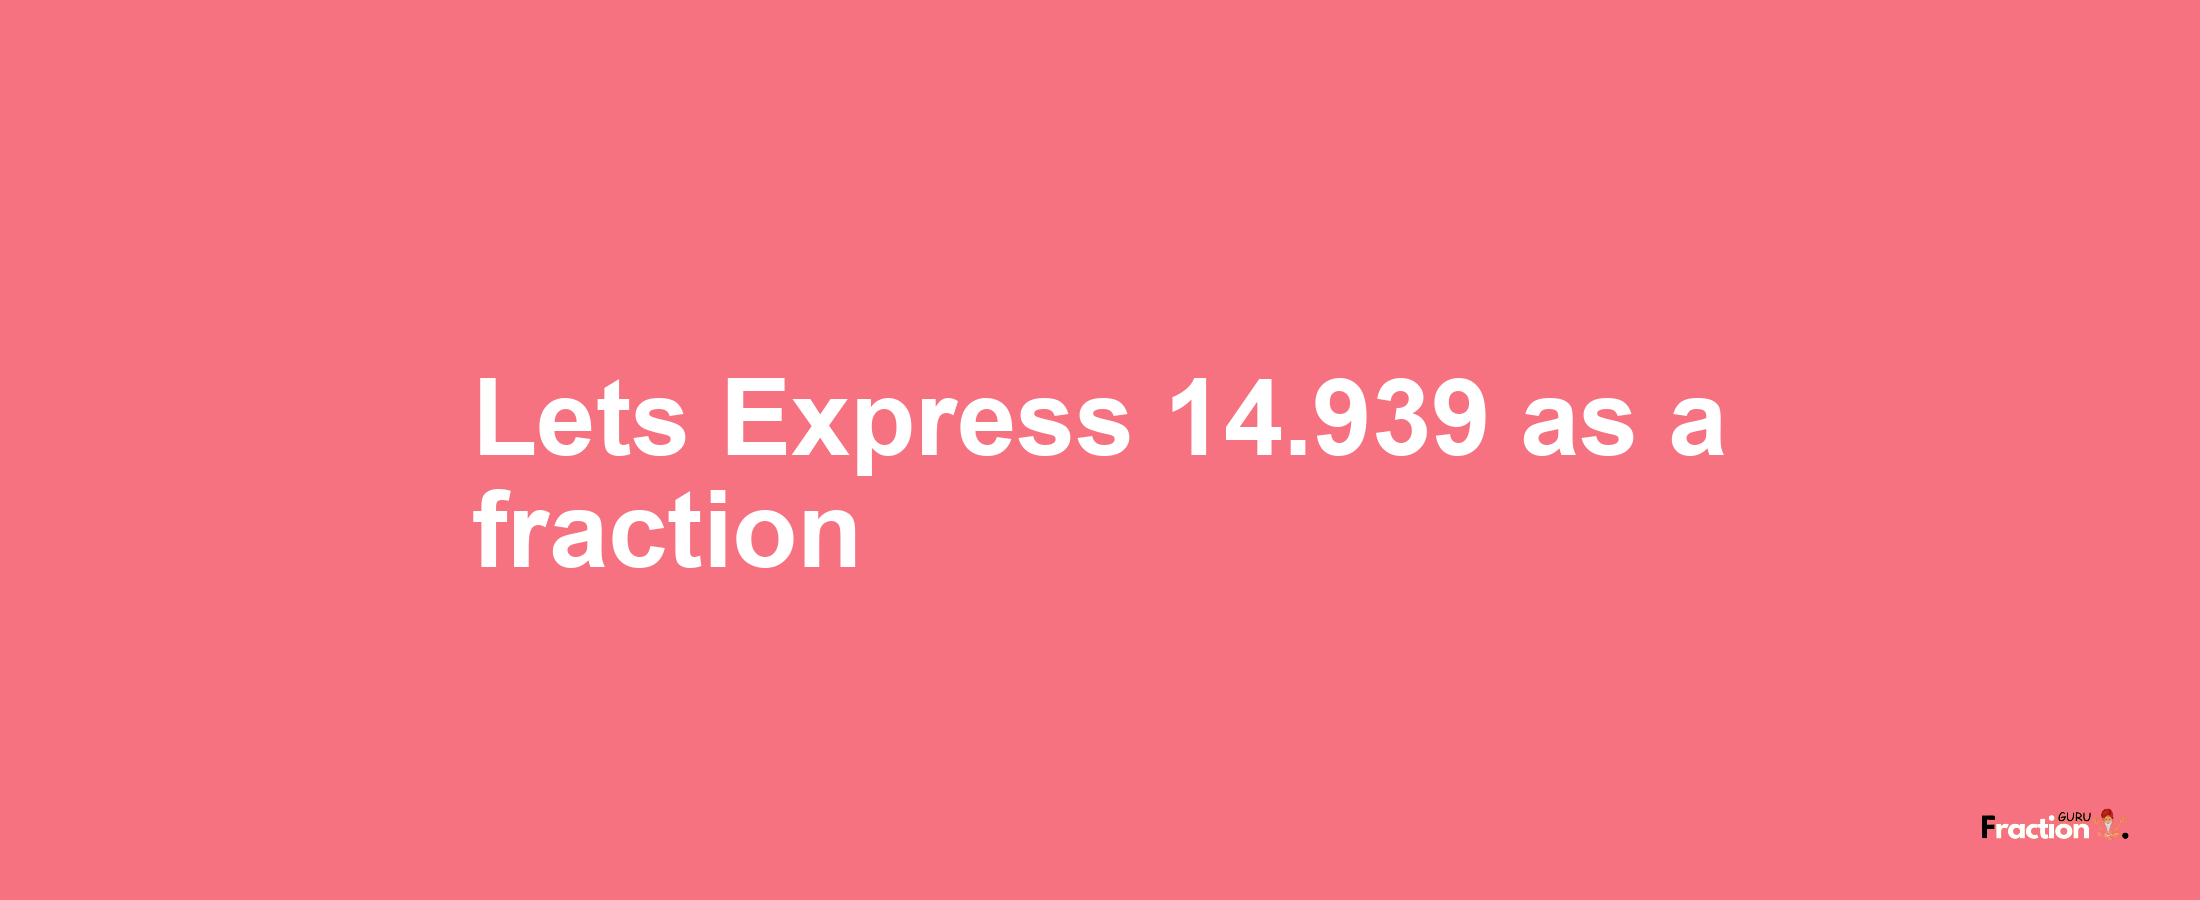 Lets Express 14.939 as afraction